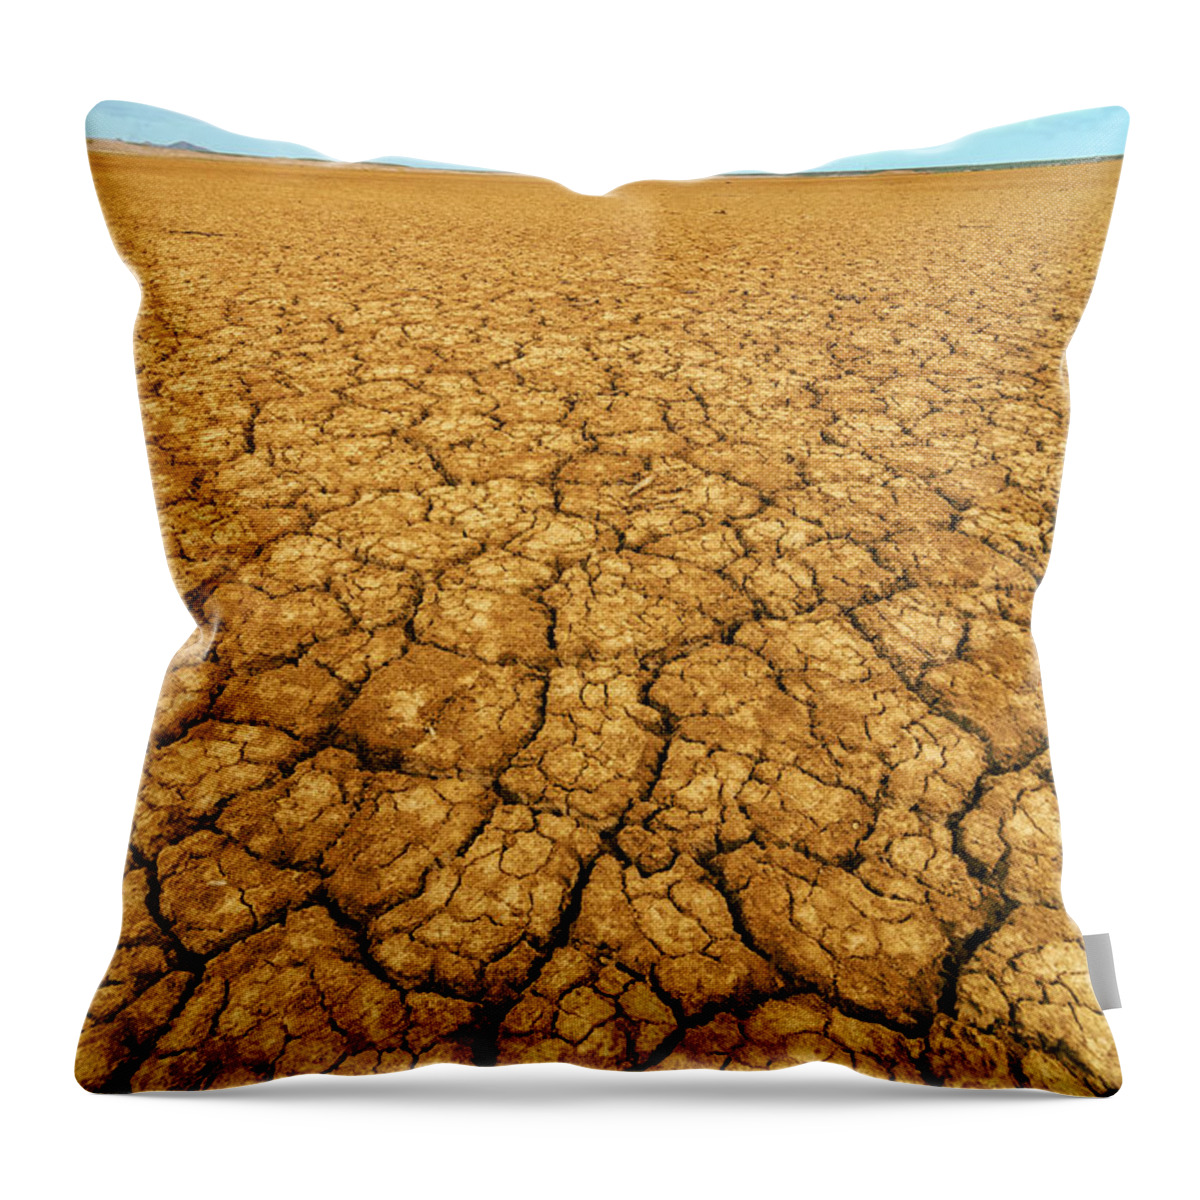 Desert Throw Pillow featuring the photograph Dry Cracked Earth #1 by Jess Kraft